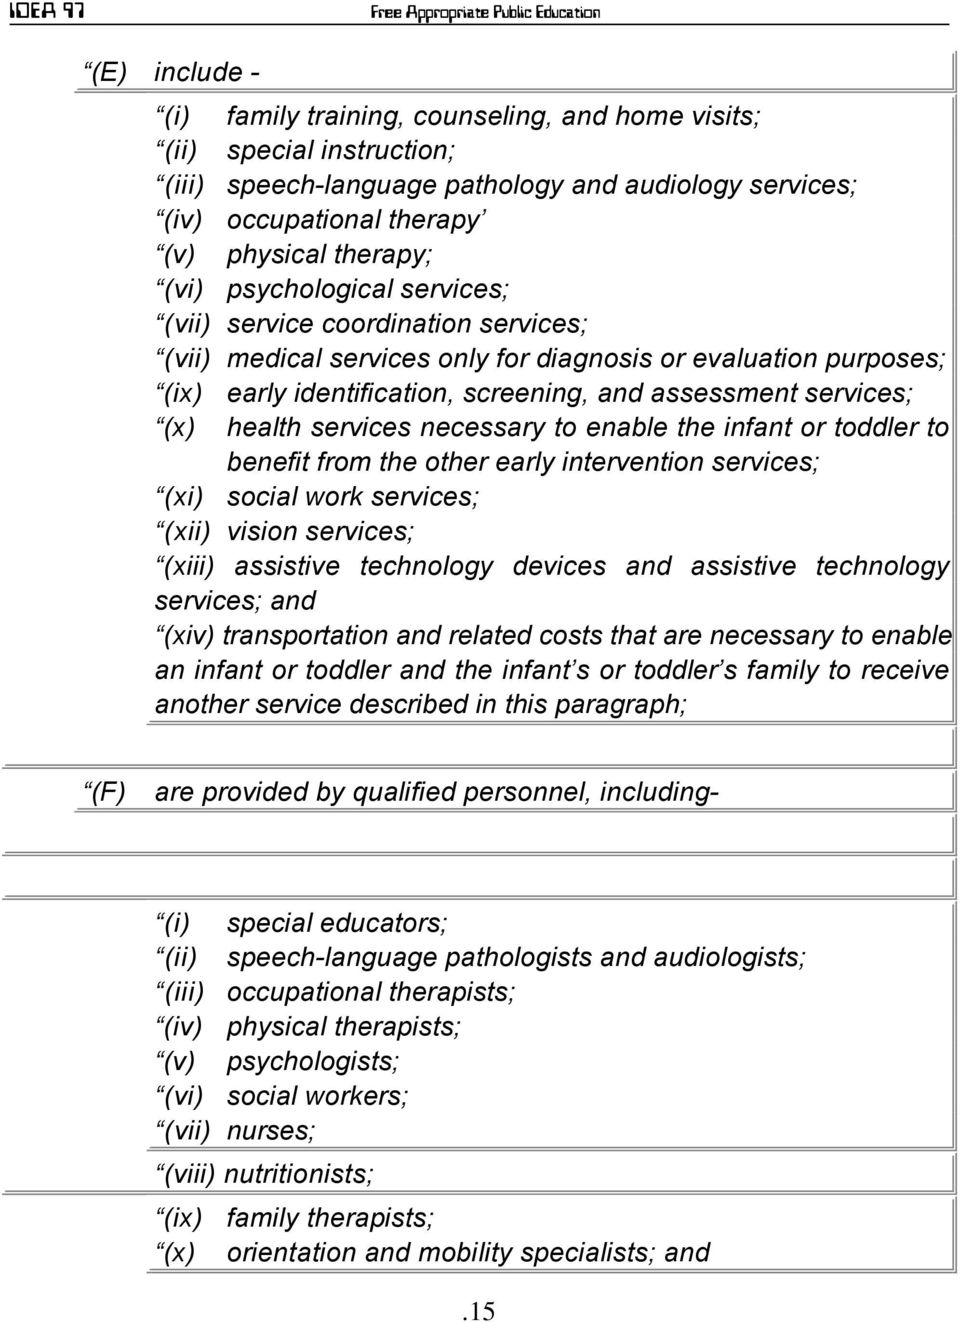 health services necessary to enable the infant or toddler to benefit from the other early intervention services; (xi) social work services; (xii) vision services; (xiii) assistive technology devices